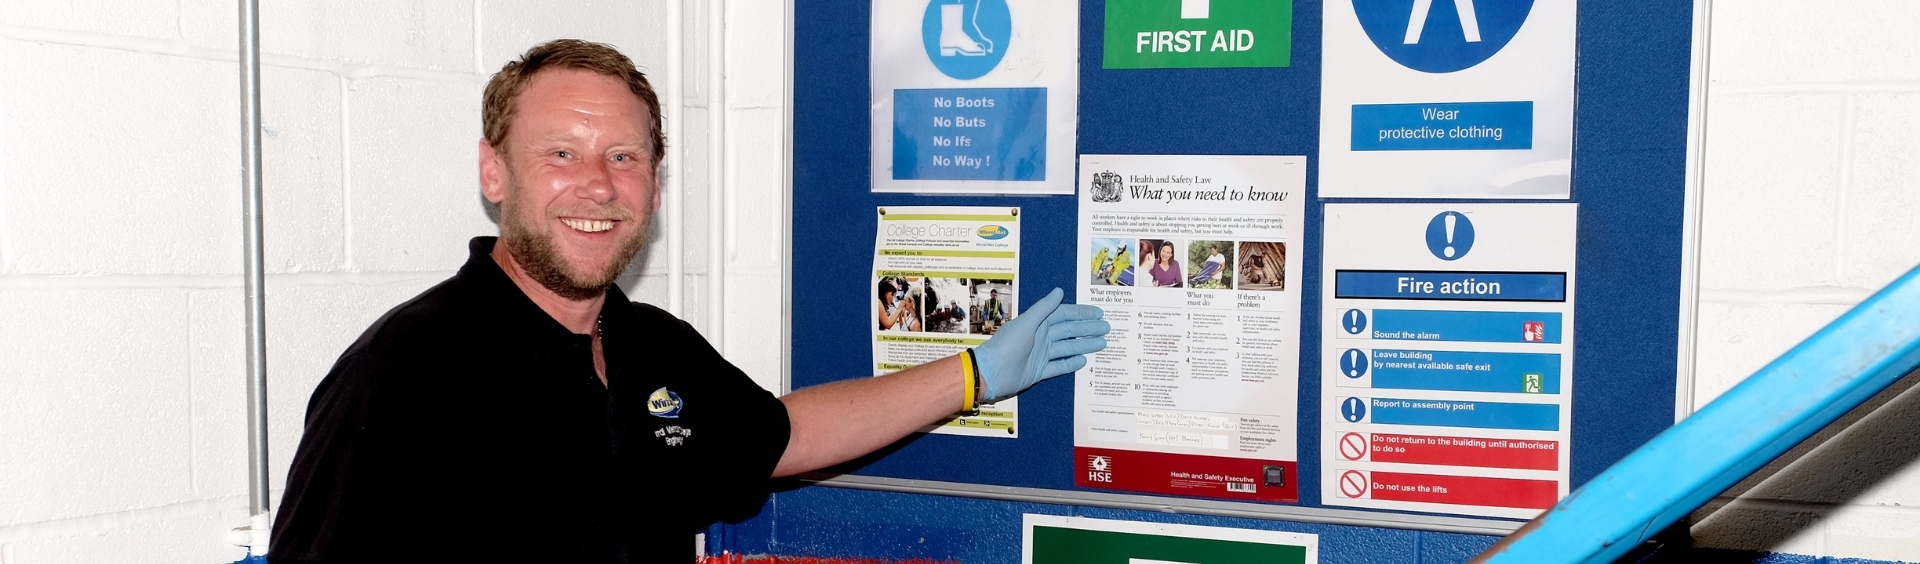 WMC Prevention and Control of Infection student pointing at noticeboard in classroom